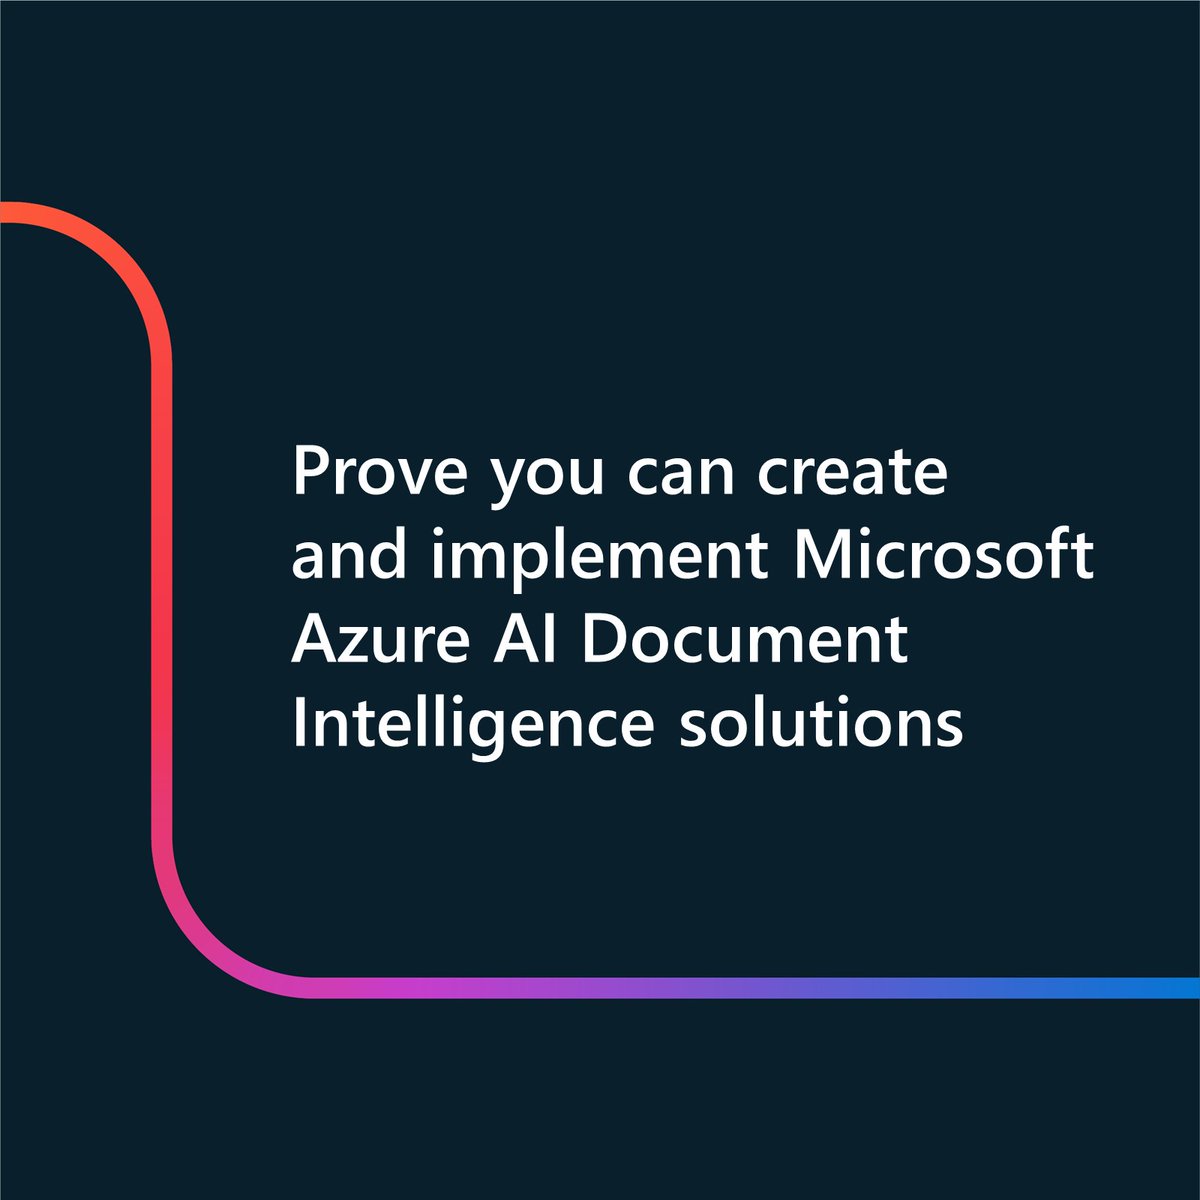 Ready to wow employers with your skills in Microsoft Azure AI Document Intelligence solutions? 

This Microsoft Applied Skills credential should help 😏 msft.it/6012YuEOu